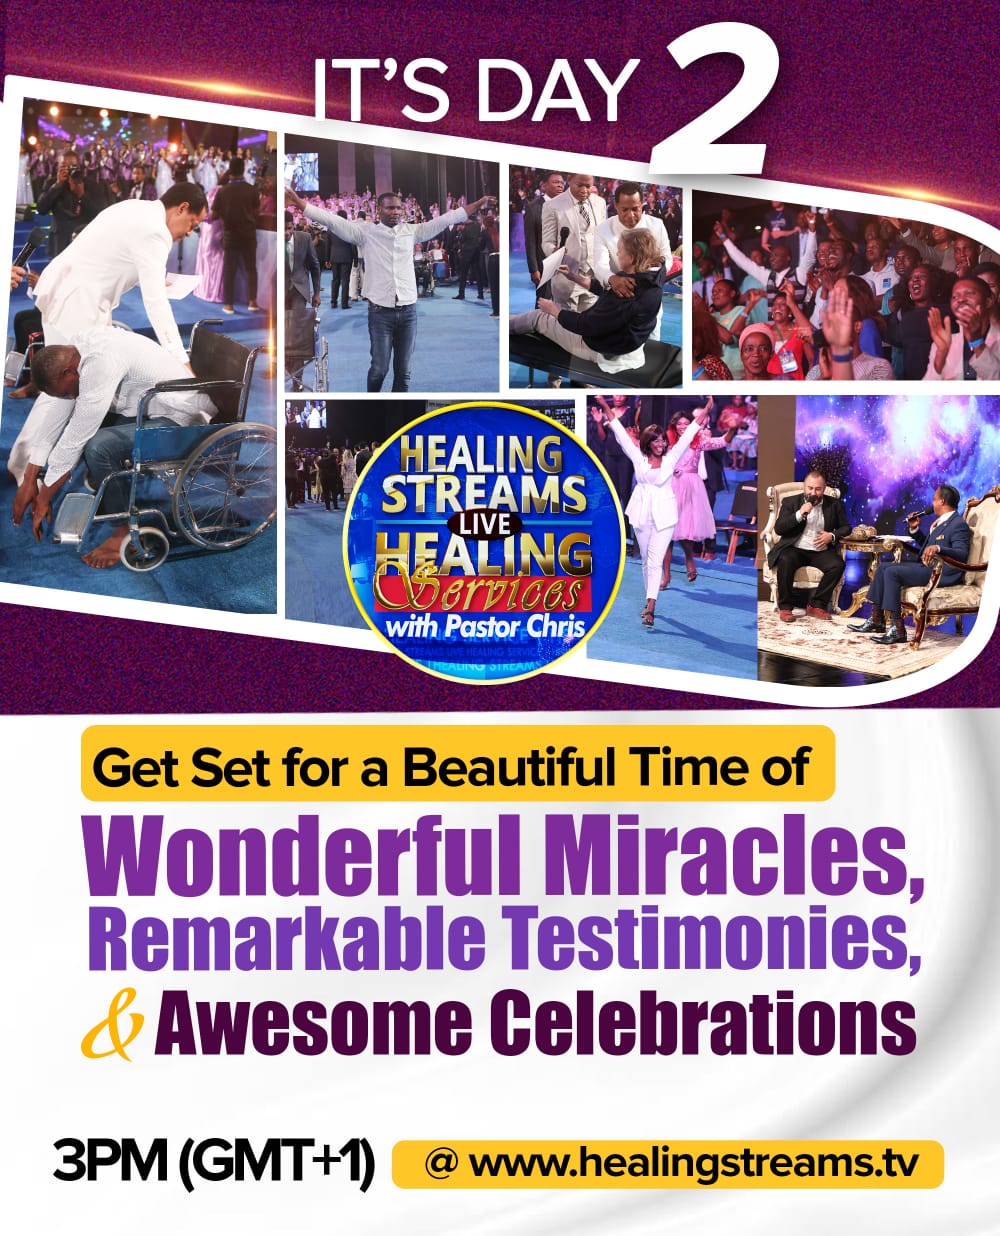 DAY 2 IN A BIT 😍💃💃💃 HEALING STREAMS LIVE HEALING SERVICES WITH PASTOR CHRIS 🌏💯